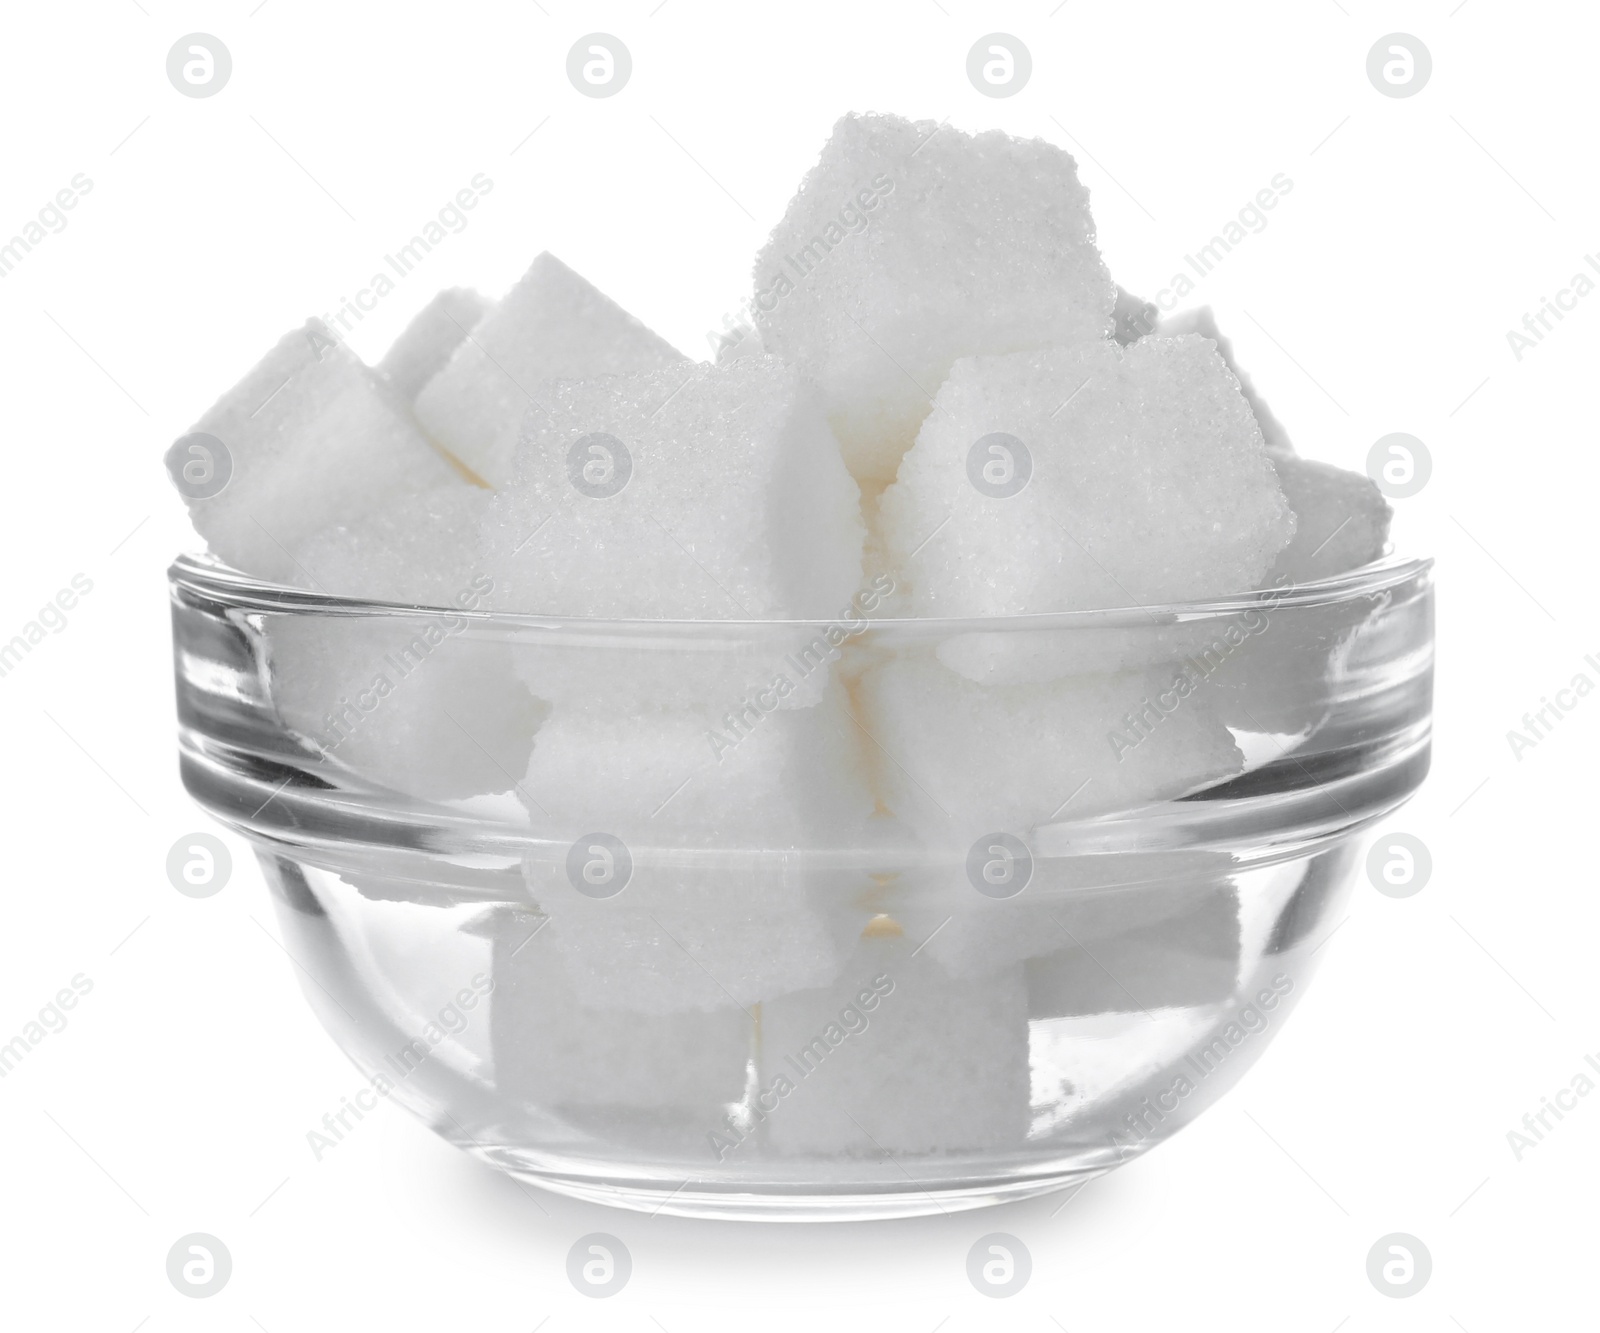 Photo of Refined sugar cubes in glass bowl isolated on white